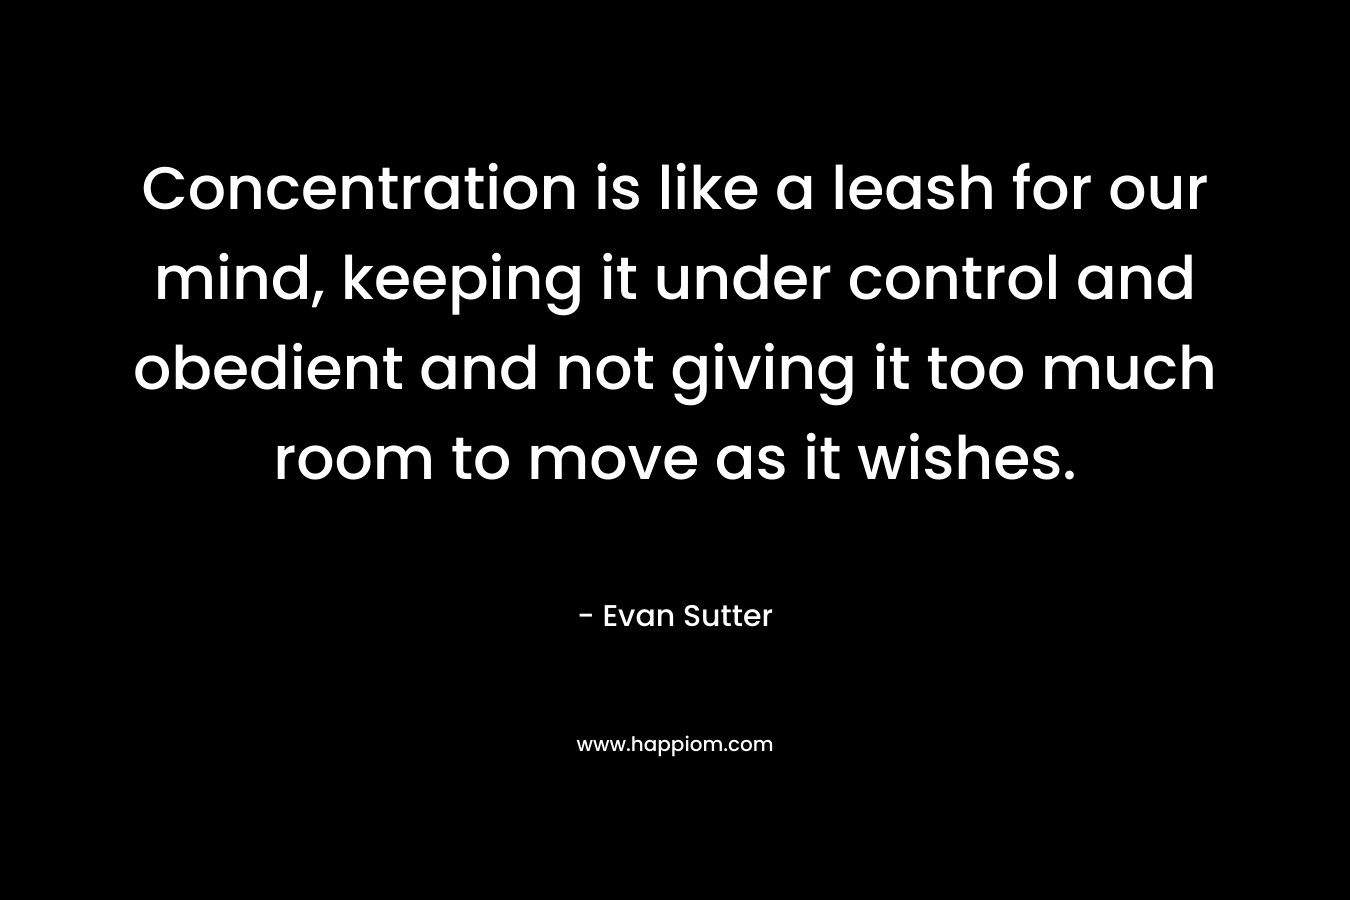 Concentration is like a leash for our mind, keeping it under control and obedient and not giving it too much room to move as it wishes. – Evan Sutter